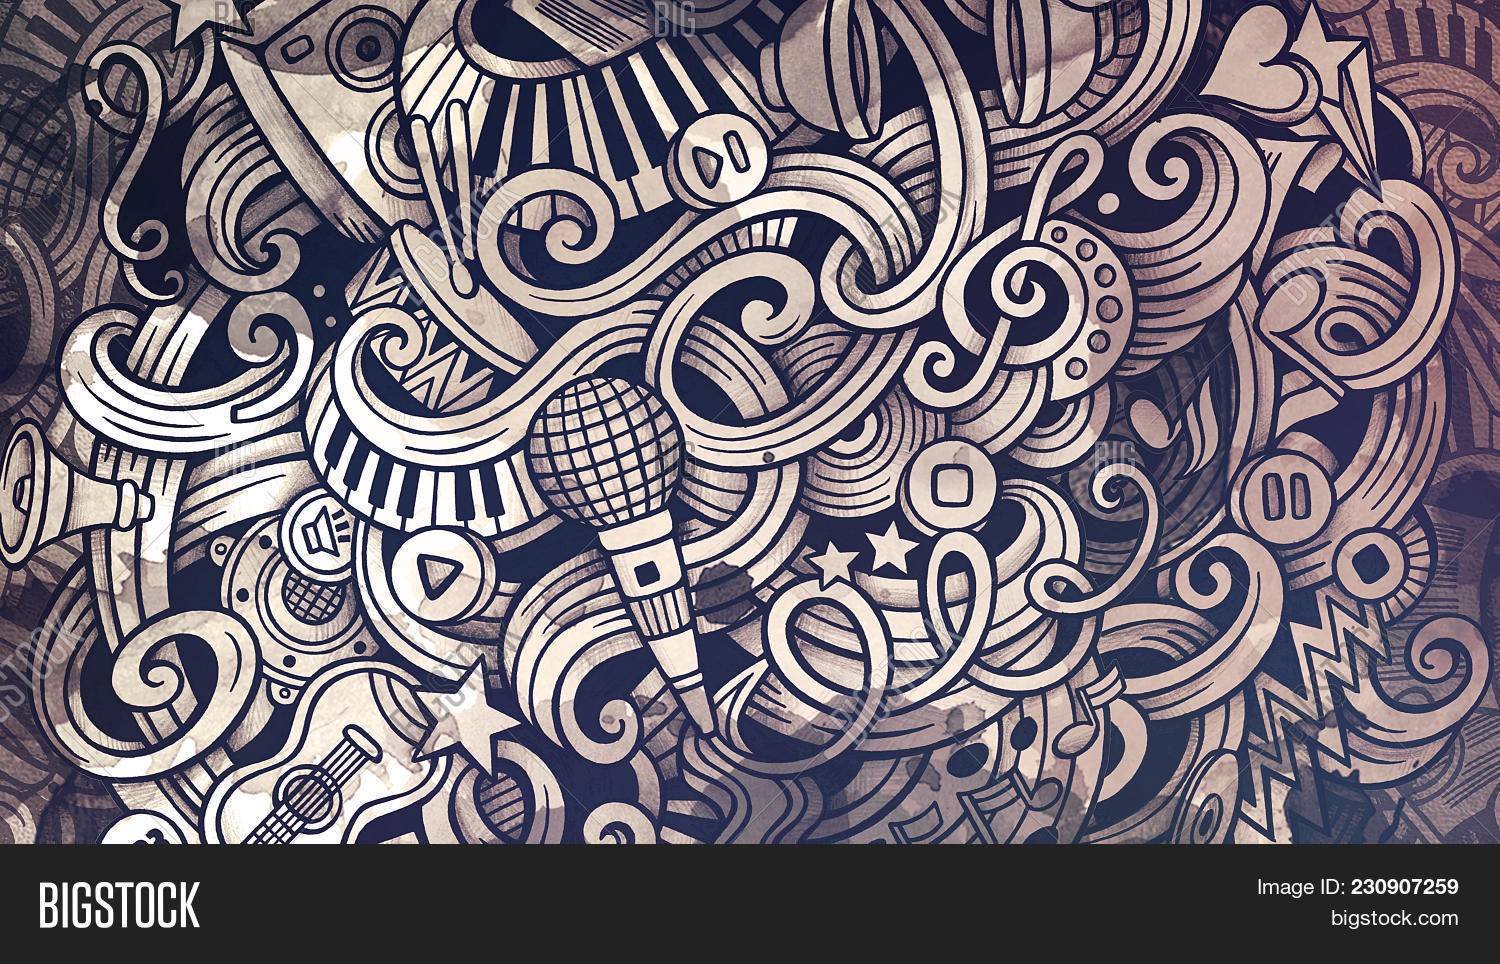 Doodles Musical Image Photo Trial Bigstock